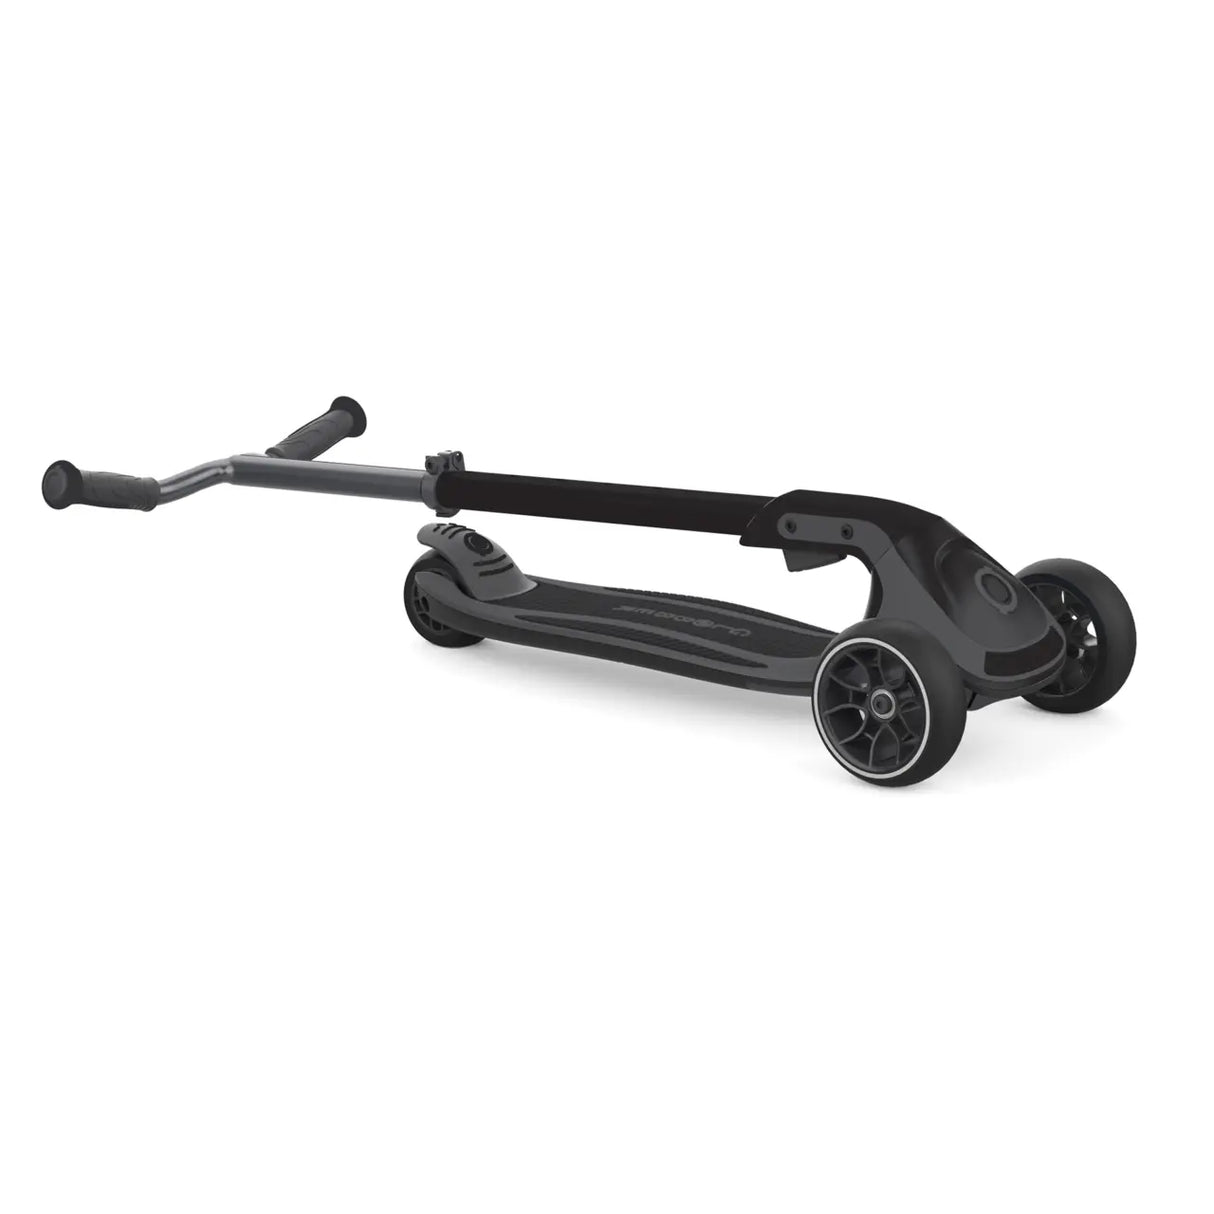 GLOBBER  ULTIMUM  SCOOTER - CHARCOAL GREY